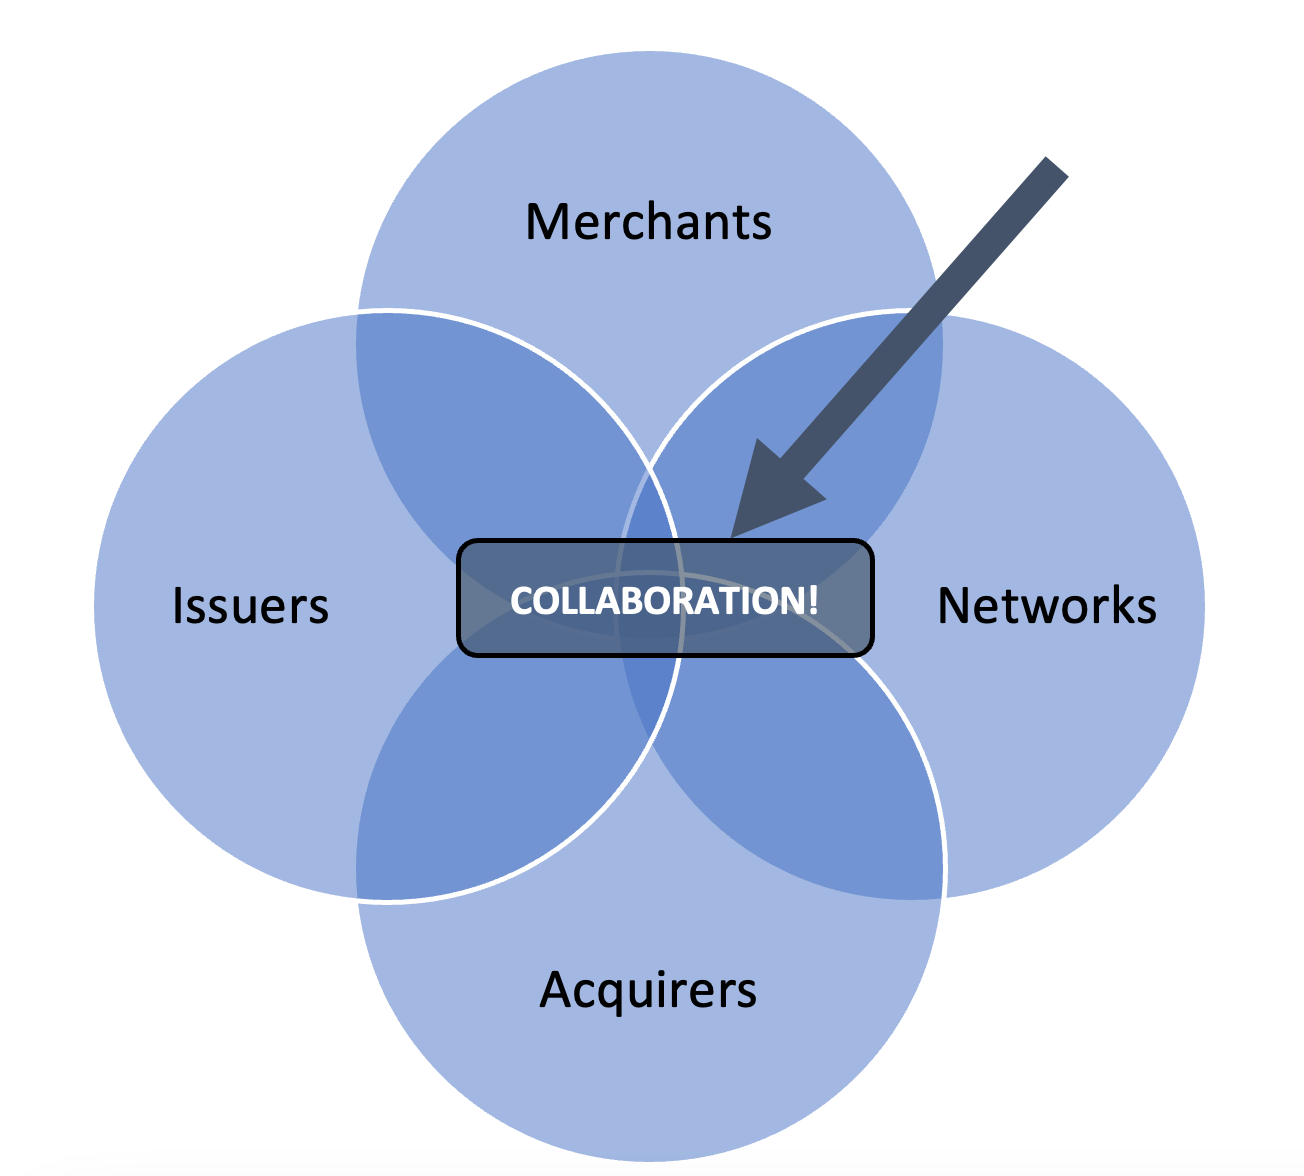 Collaboration brings issuers, merchants, networks, and acquirers together